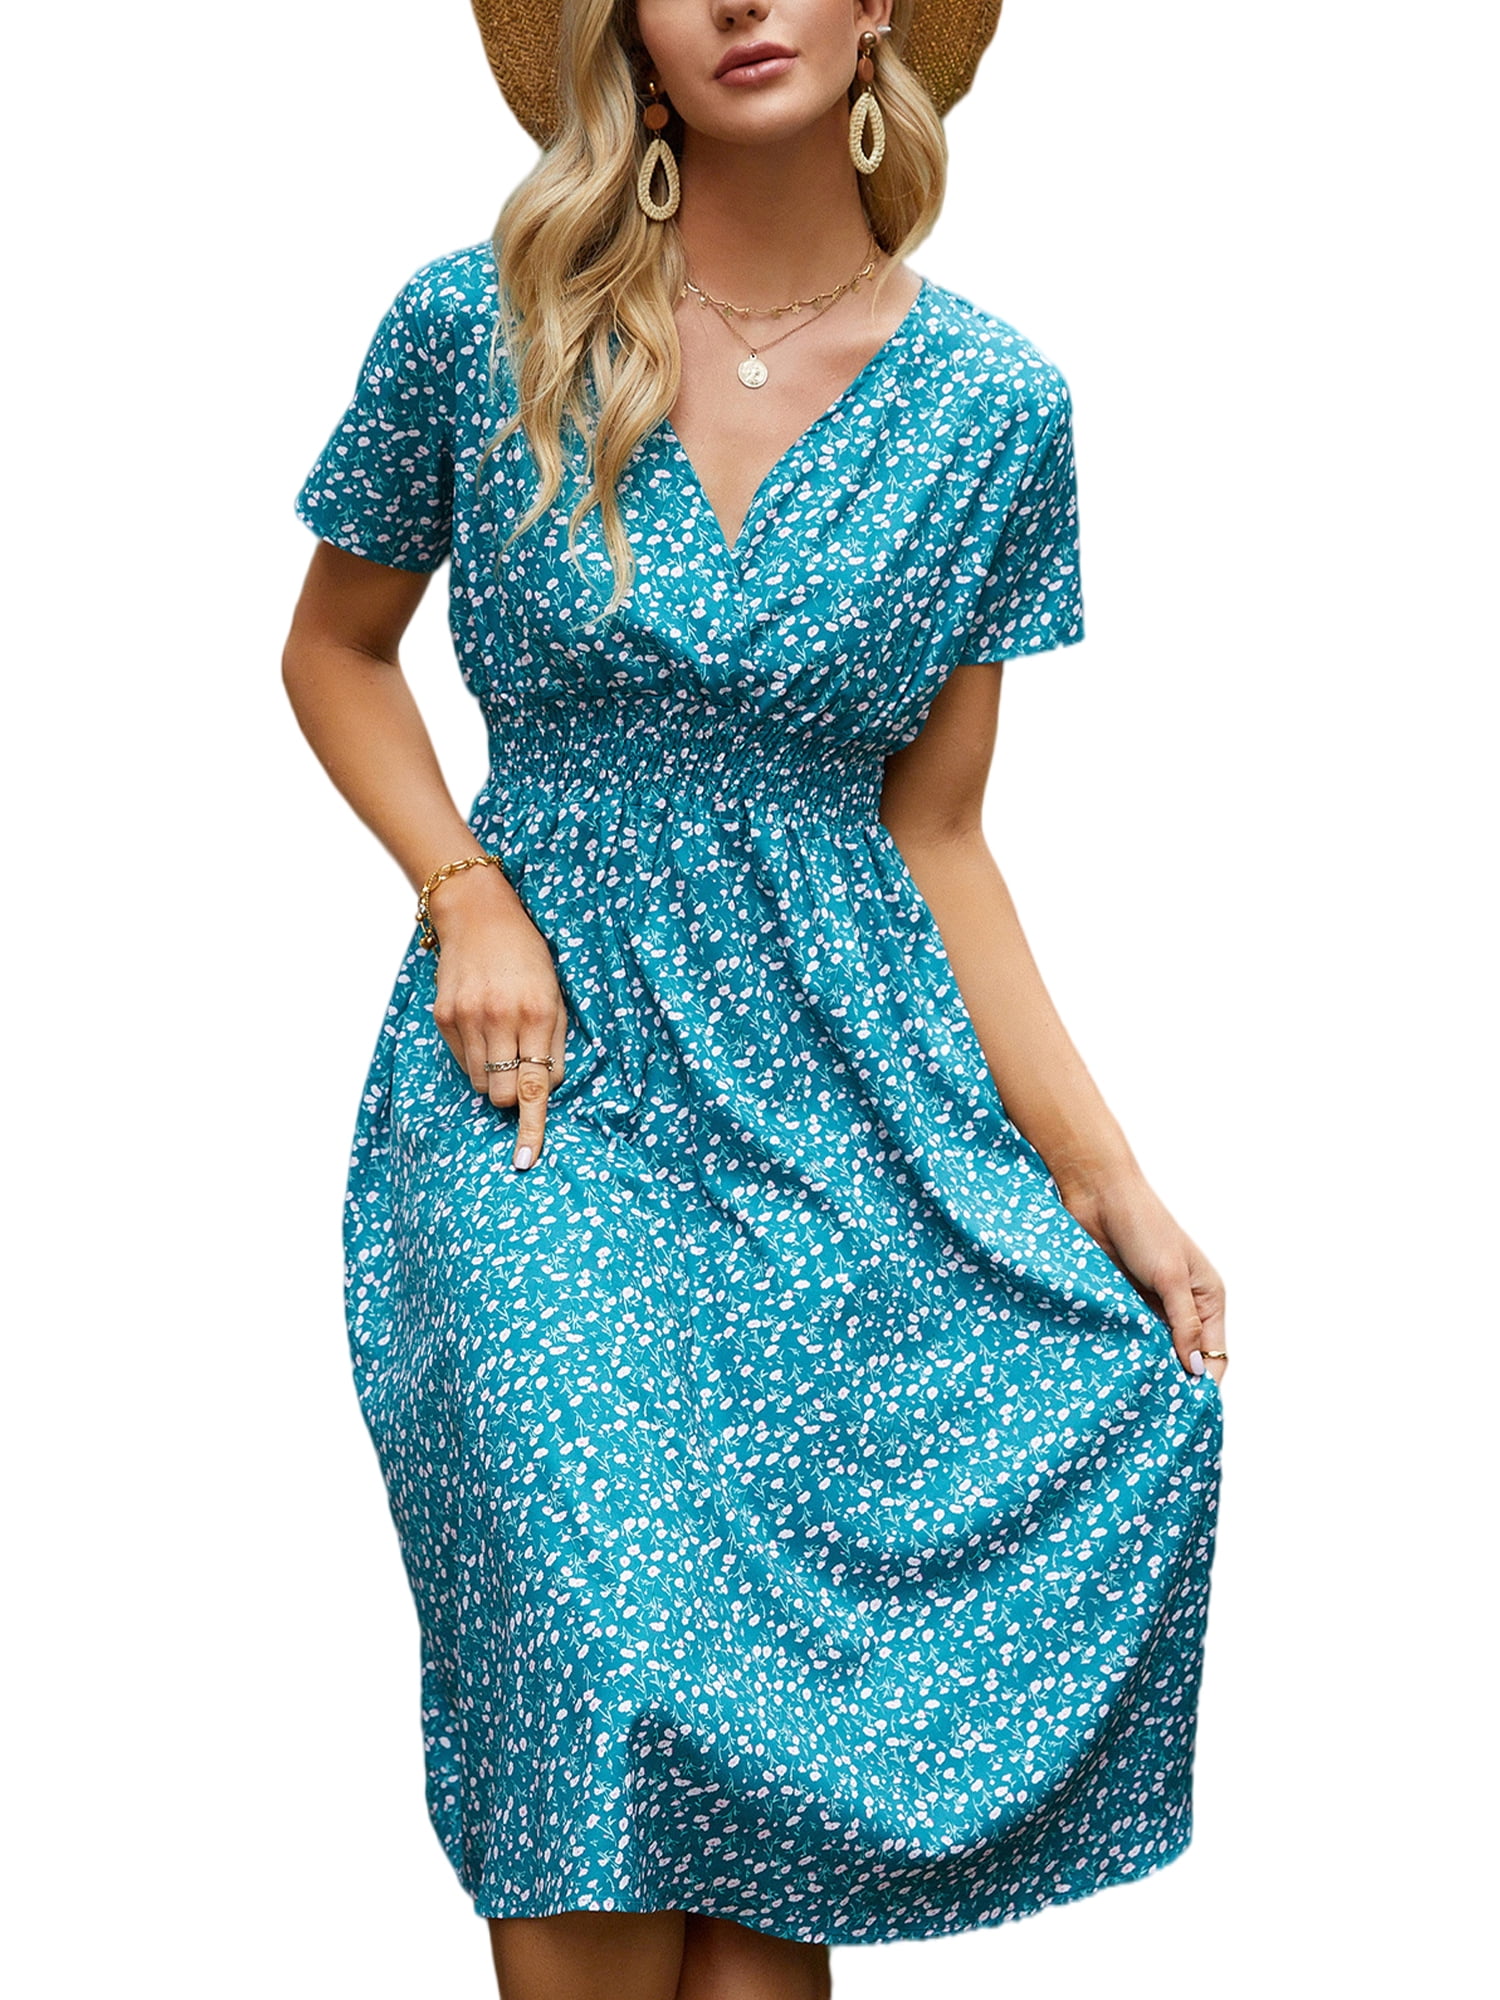 Niuer Boho Long Dress For Women Casual Ladies Wrap Summer Ruffled Holiday Sundress Cocktail Party Tiered Dresses - Walmart.com